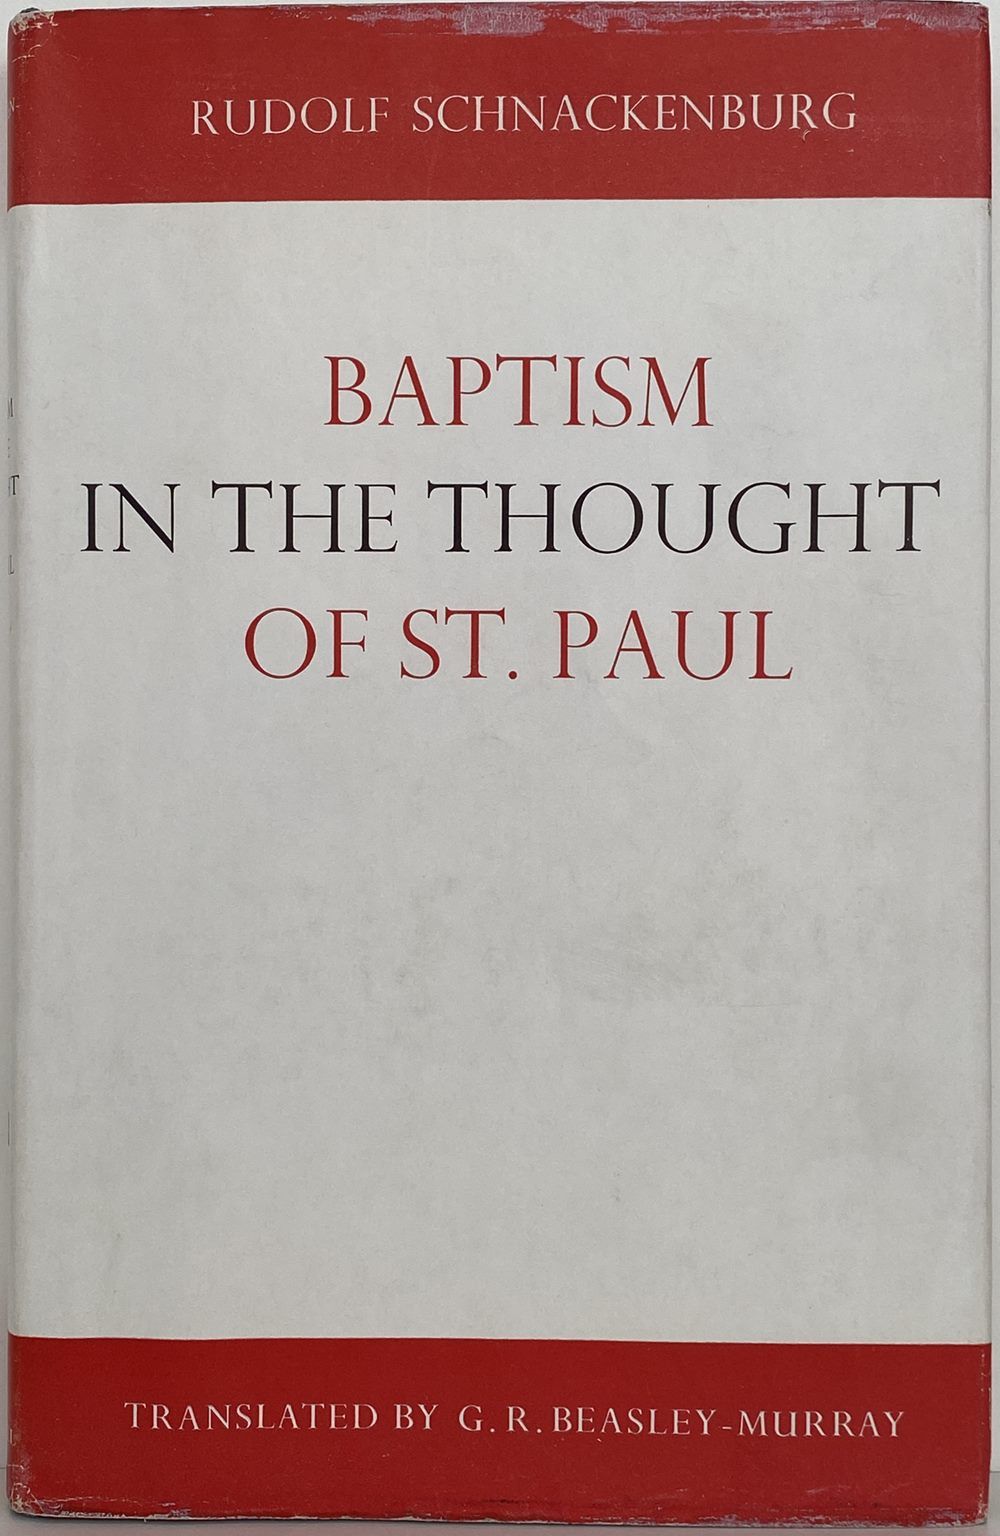 BAPTISIM IN THE THOUGHT OF ST. PAUL